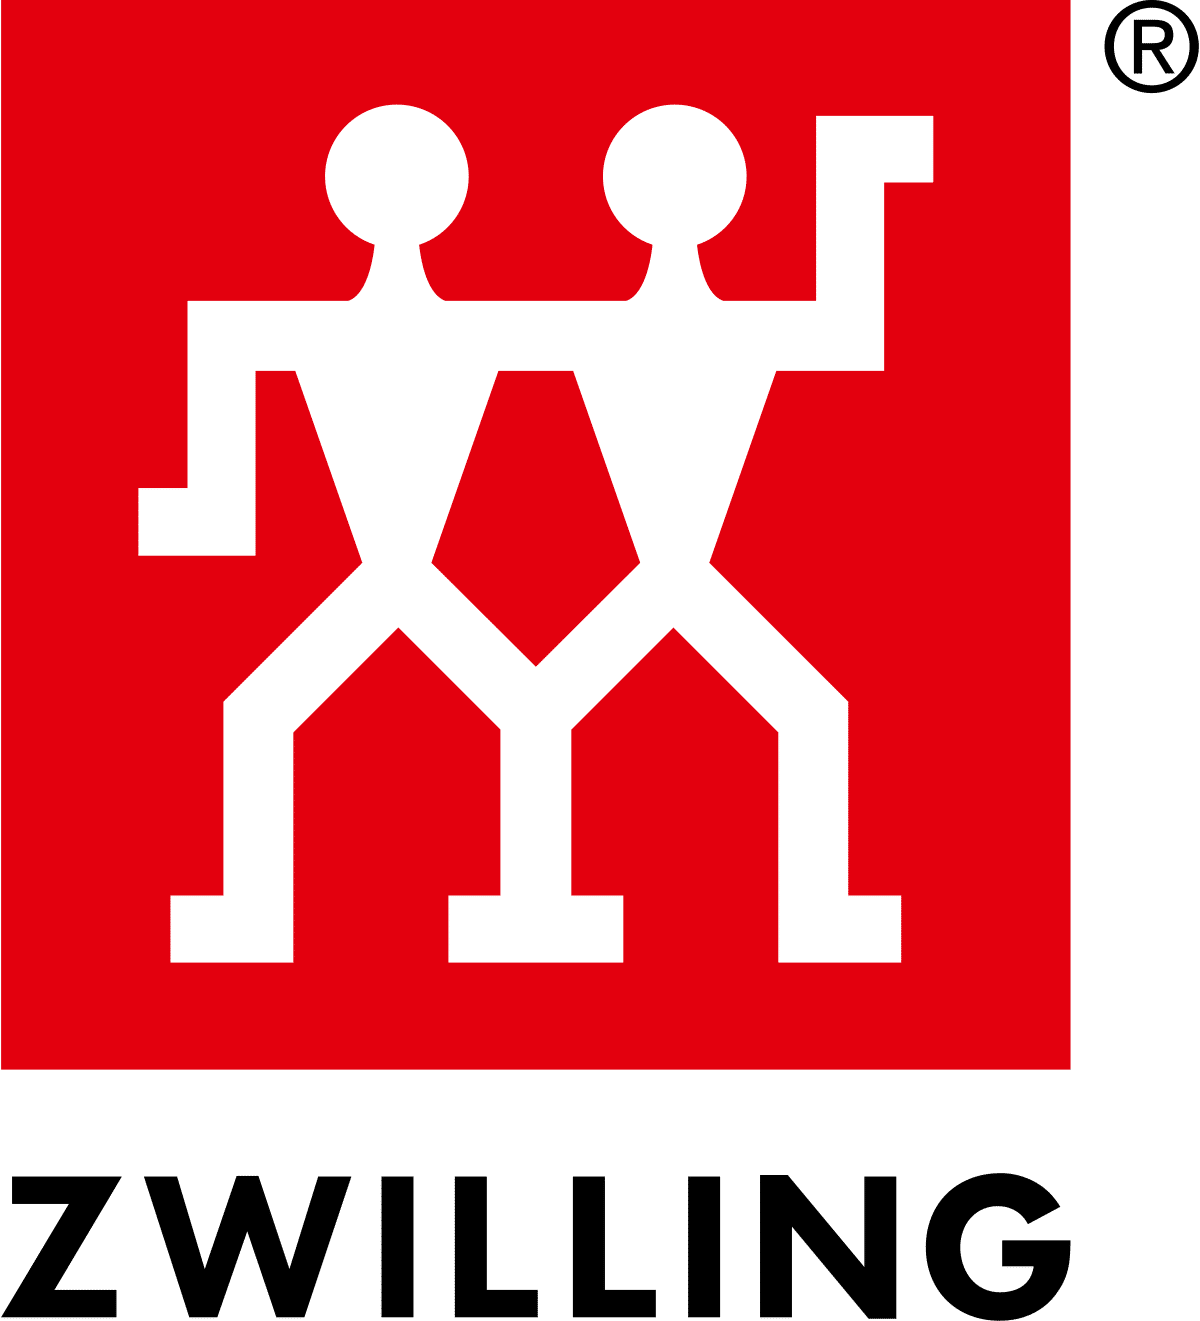 Zwilling